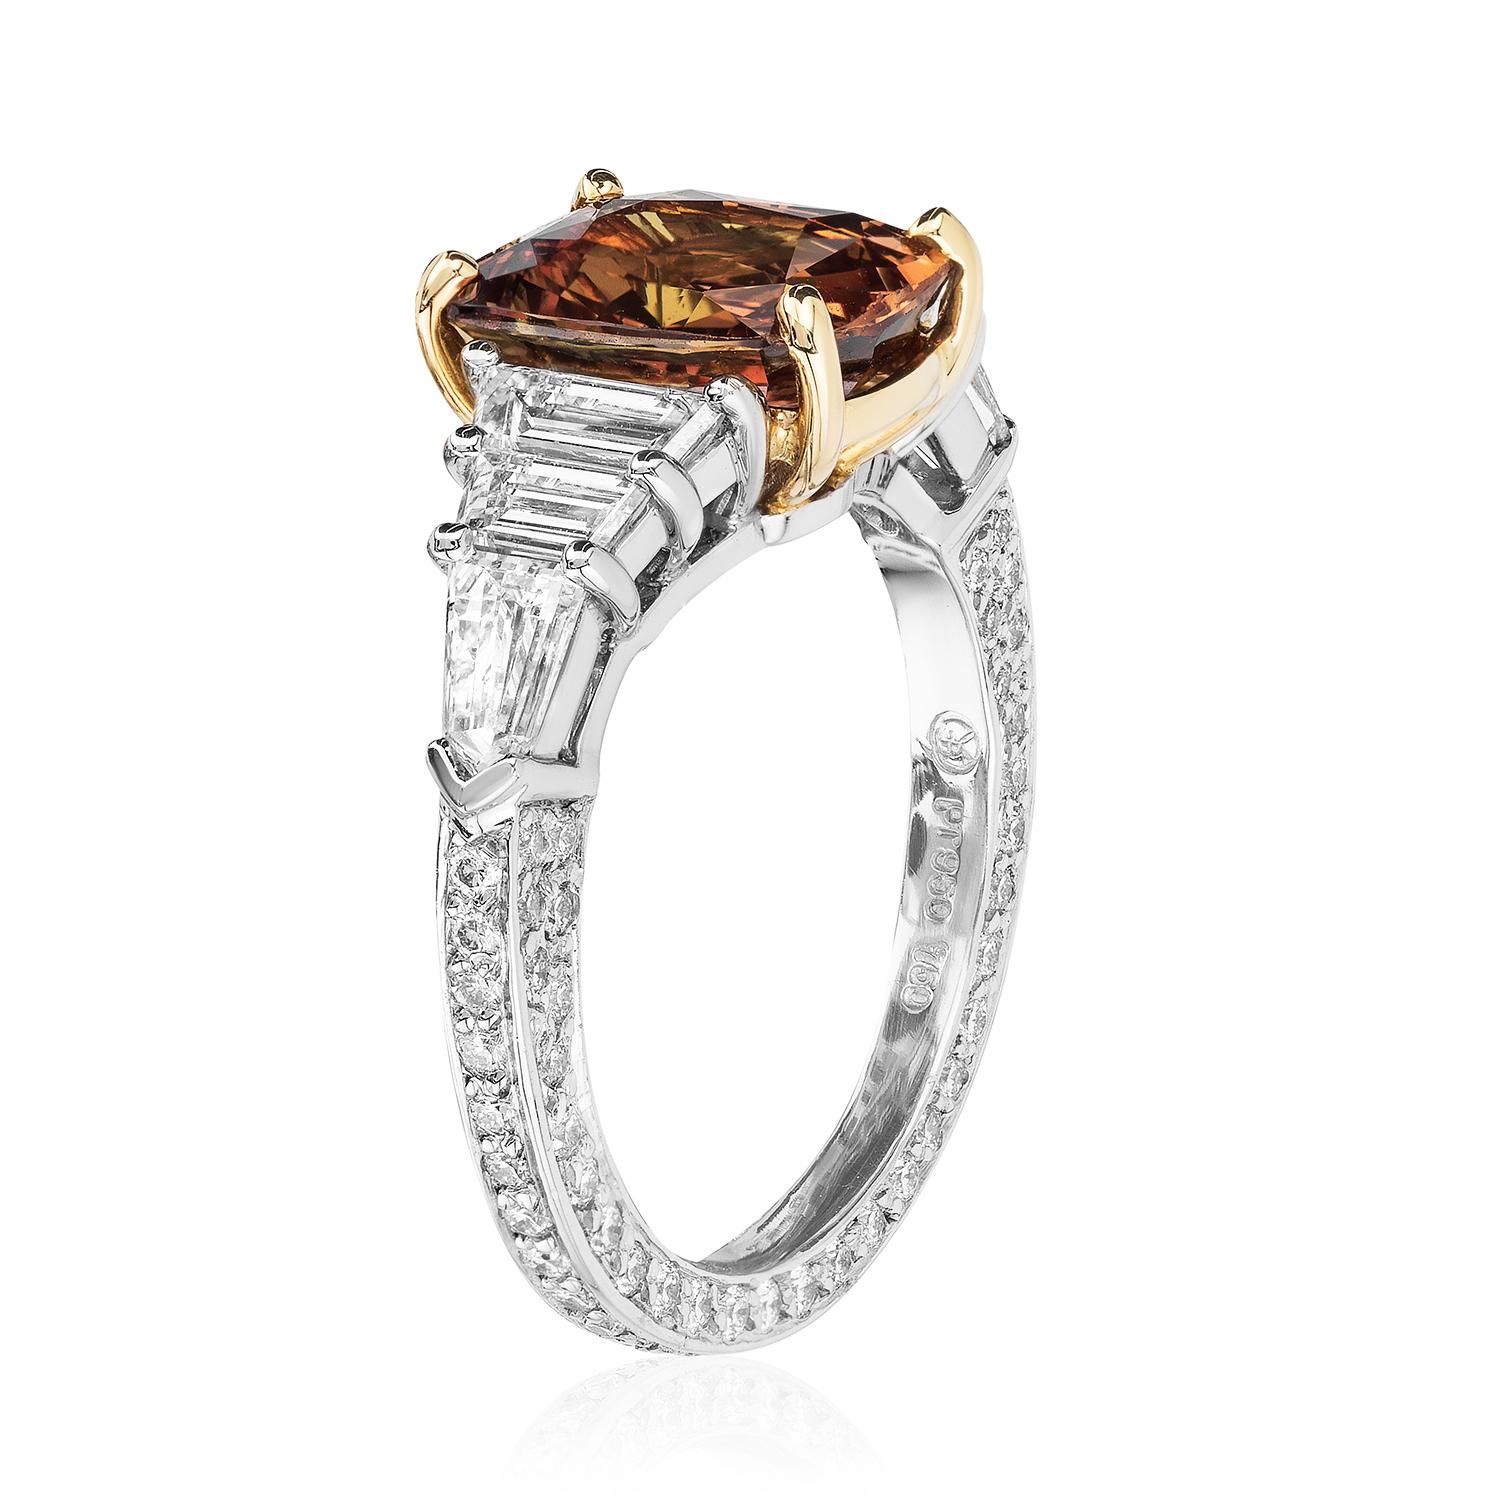 A platinum & 18kt yellow gold ring centered upon a rare 3.82 carat natural unheated cushion orange sapphire, certified by C. Dunaigre Consulting, flanked by two trapezoid colorless diamonds and a bullet colorless diamond on each side with micropavé